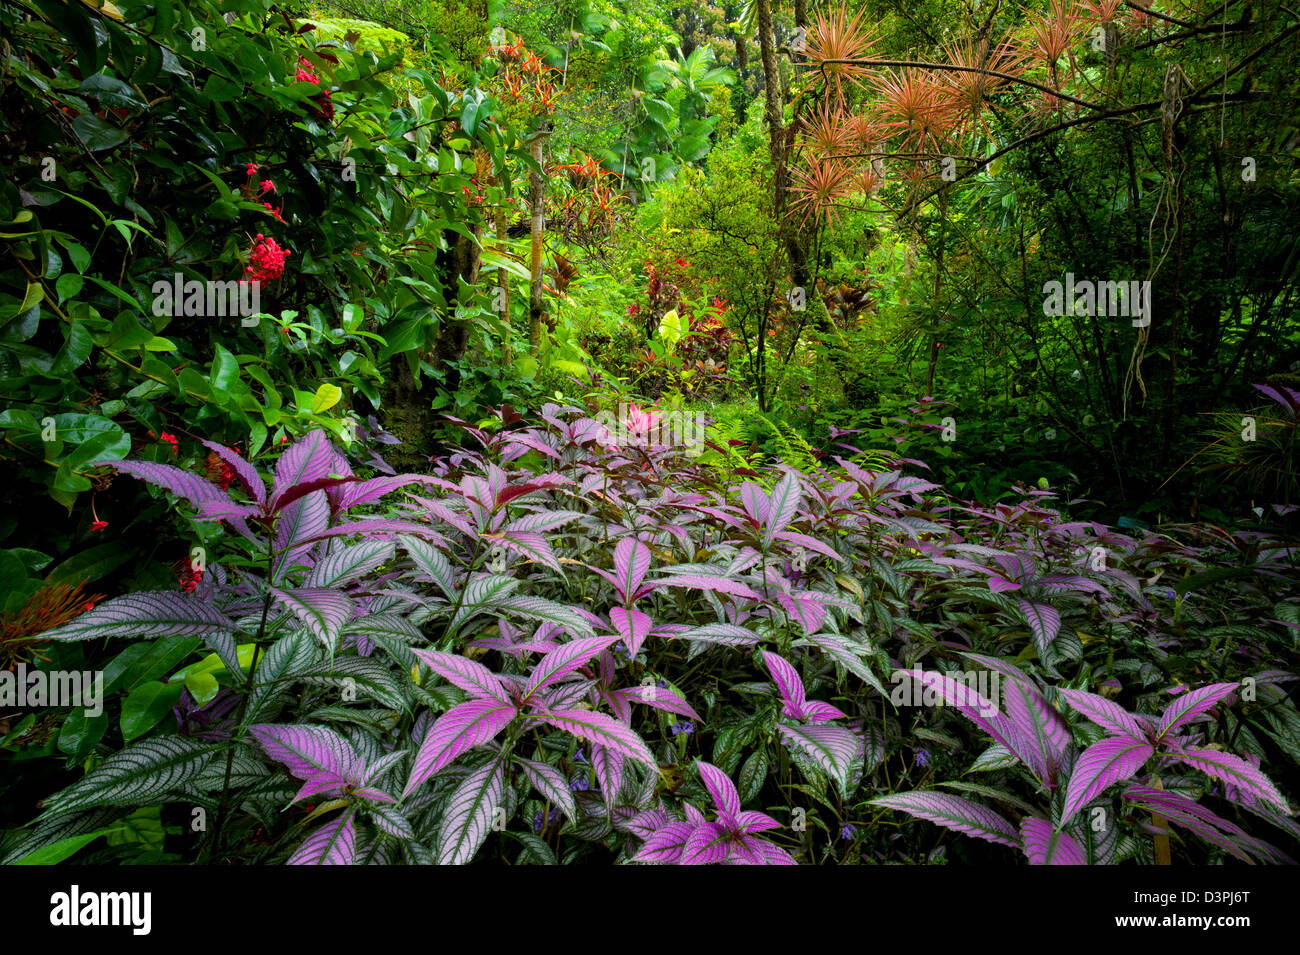 Purple Persian Shield plant in foreground and rainforest. Hawaii Tropical Botanical Gardens. Hawaii, The Big Island. Stock Photo